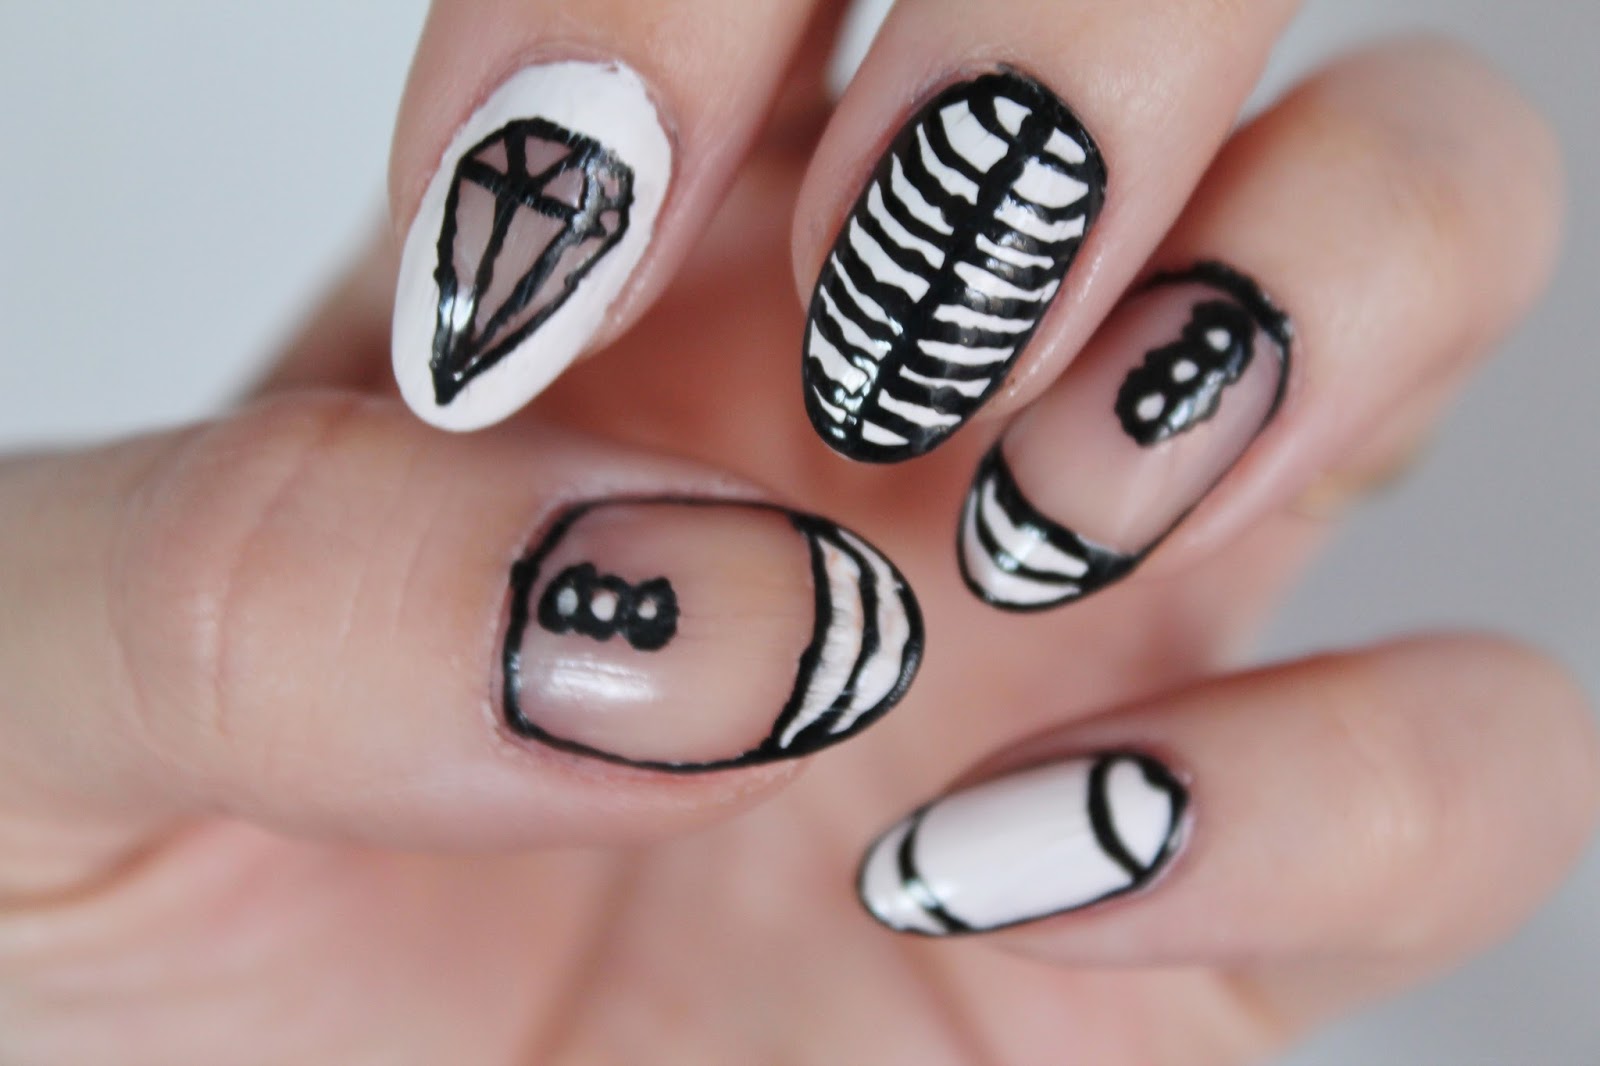 6. Straight Lines Nail Art with Negative Space - wide 10